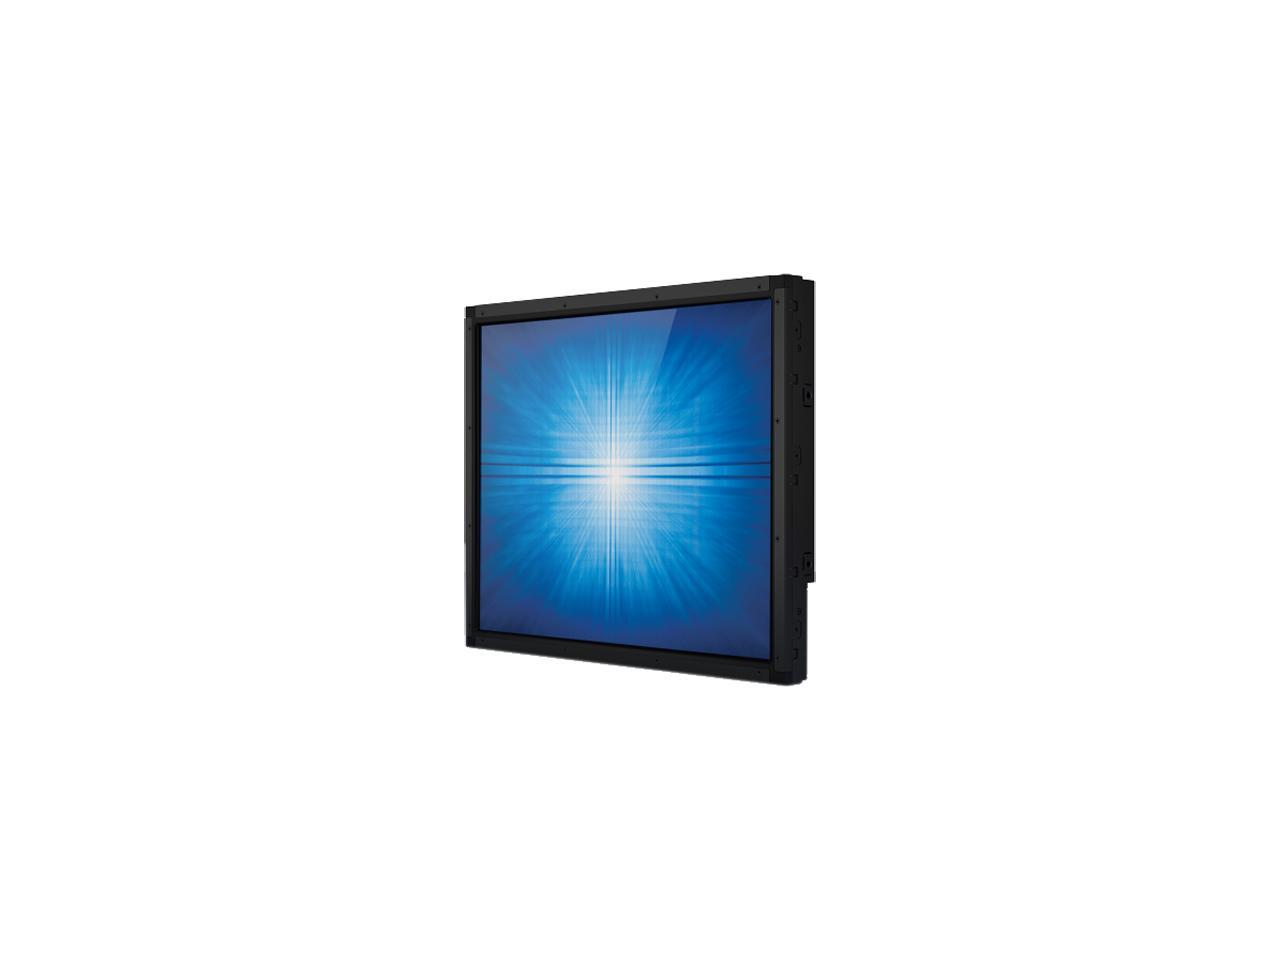 Elo E326541 1991L 19" Open-frame Commercial-grade Touchscreen Display with AccuTouch - image 2 of 5